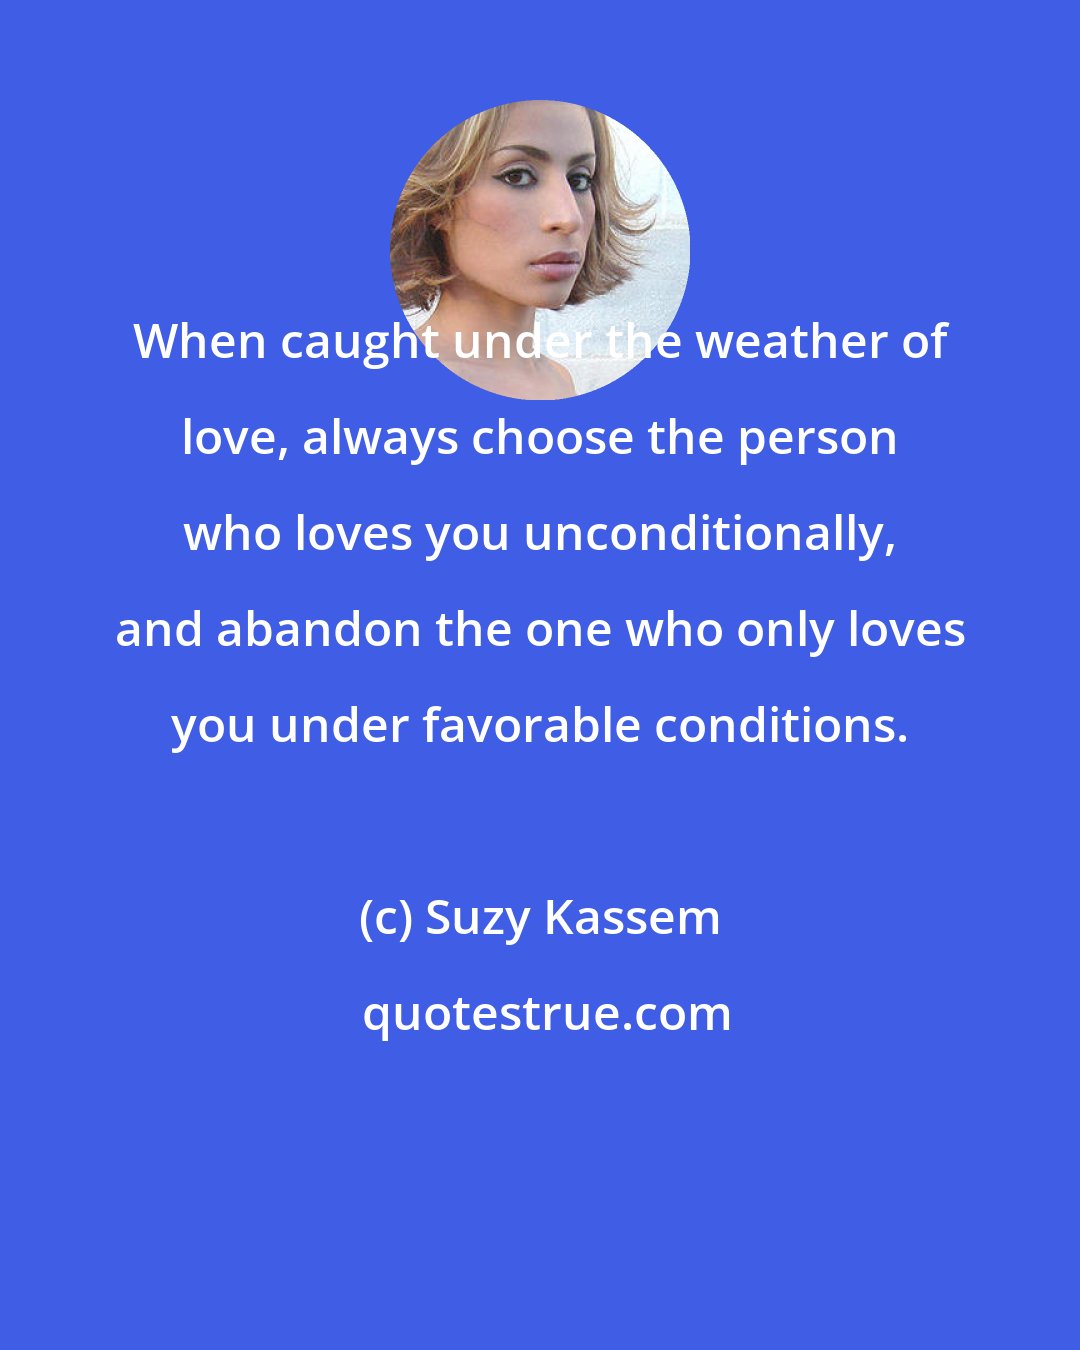 Suzy Kassem: When caught under the weather of love, always choose the person who loves you unconditionally, and abandon the one who only loves you under favorable conditions.